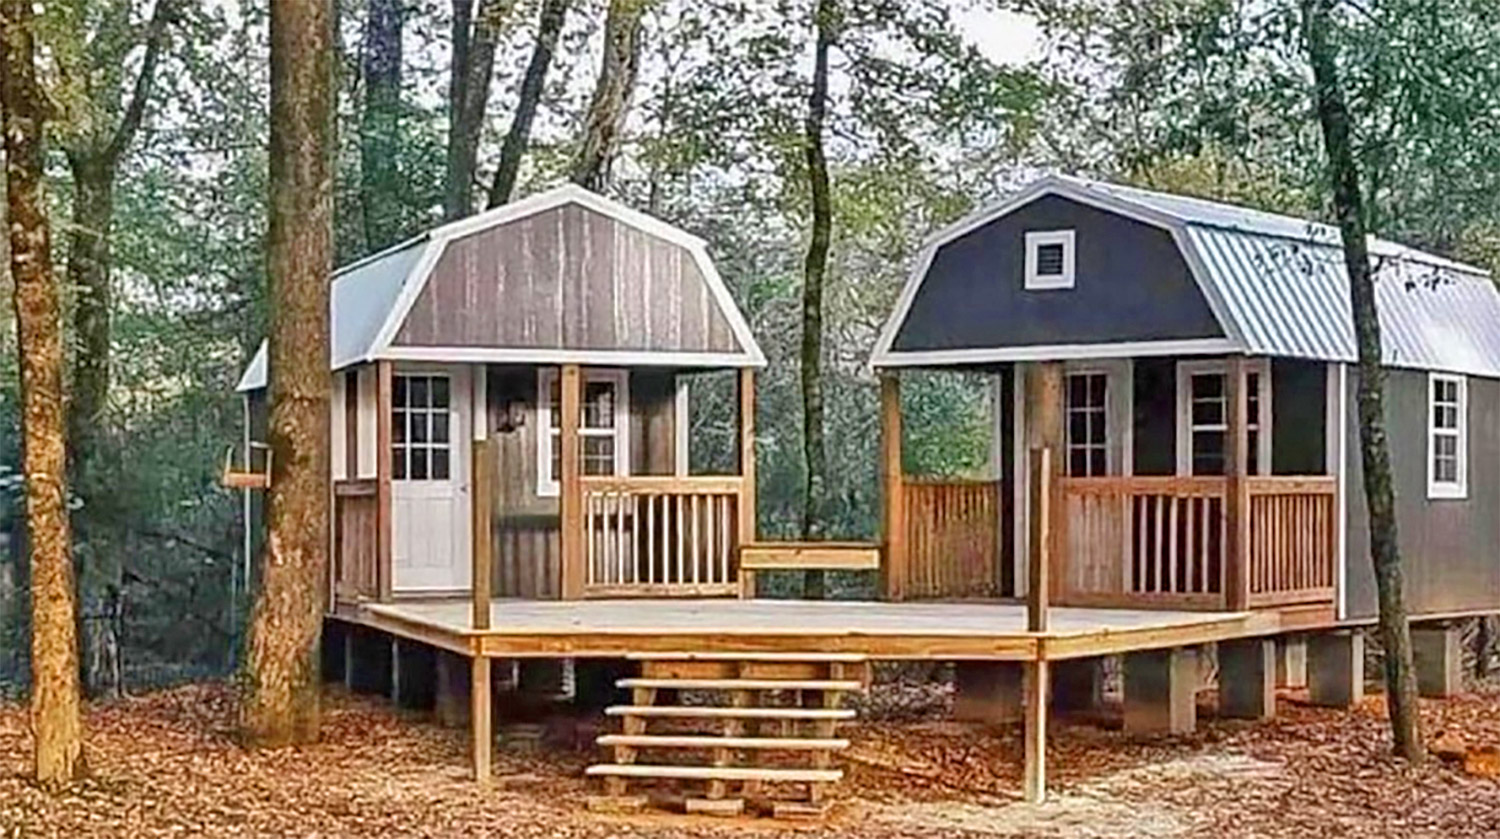 We-shed - dual tiny home he-shed and she-shed with conjoined deck